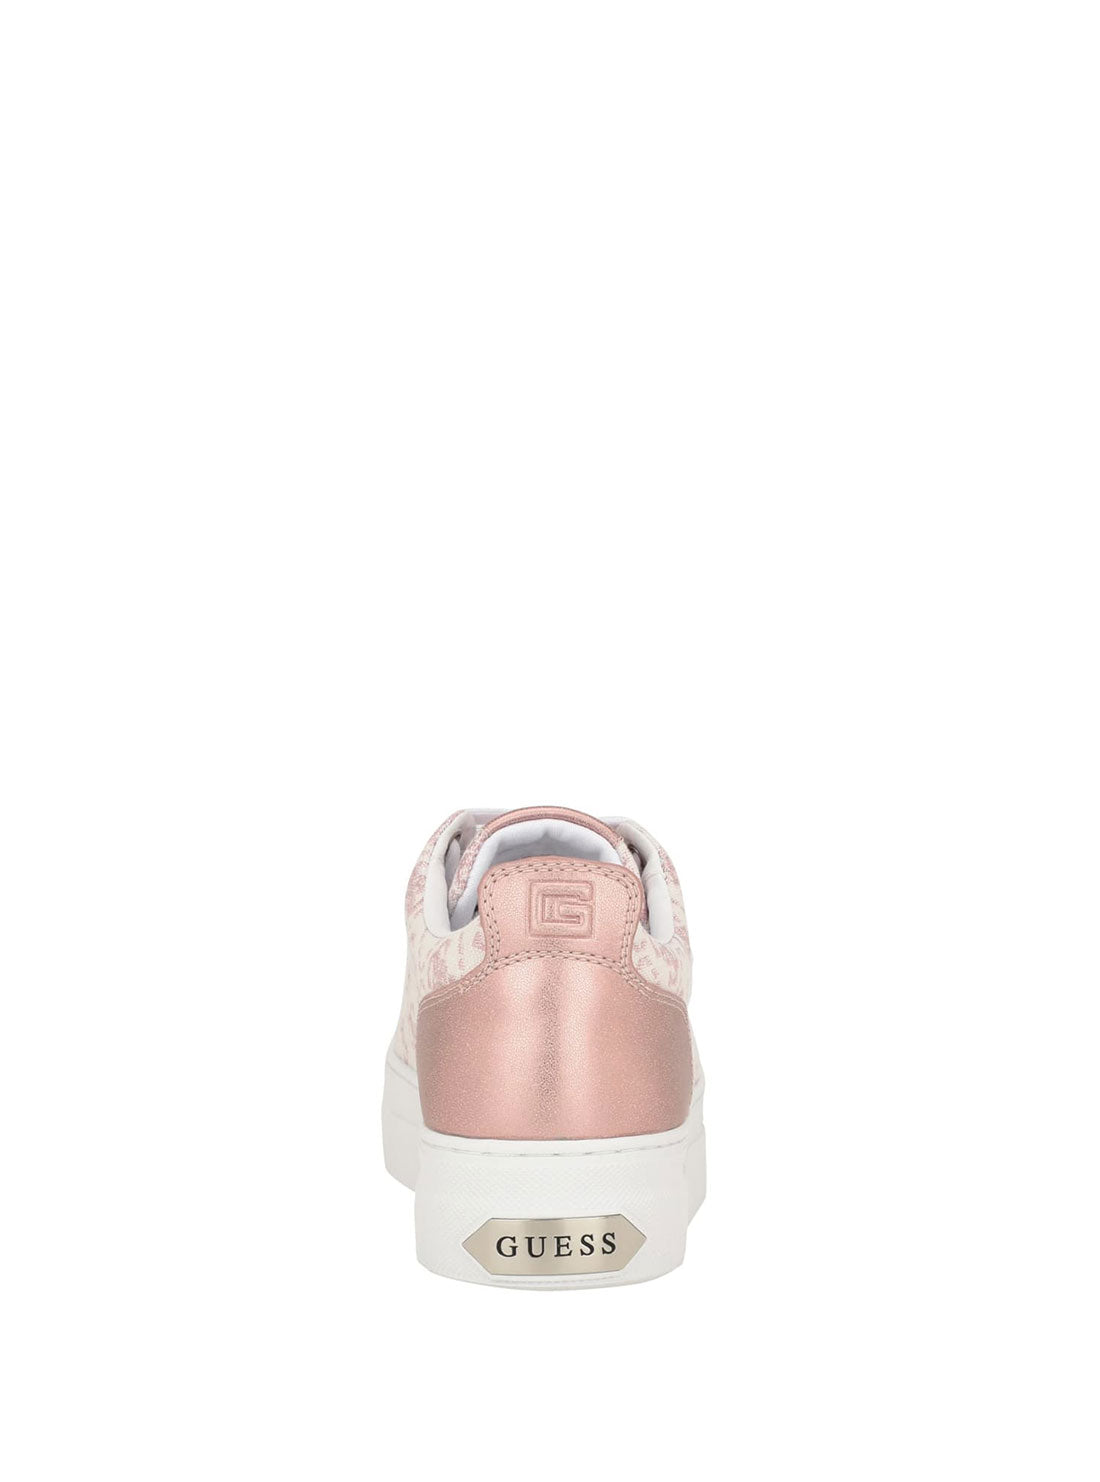 GUESS Pink Logo Low-Top Sneakers back view